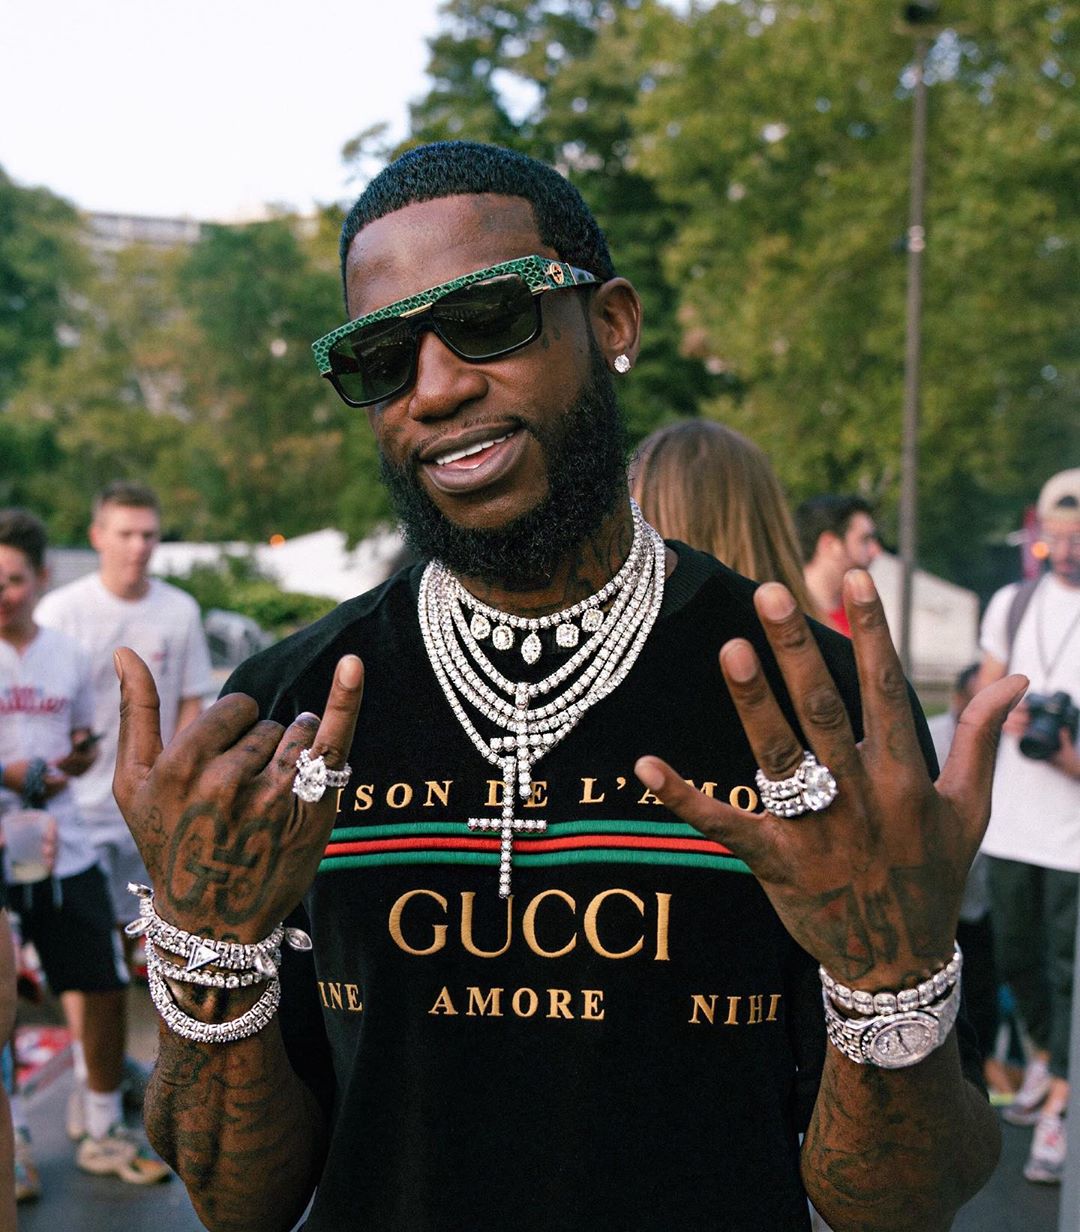 Gucci Signs New Deal With Gucci Line, Preps New Album Urban